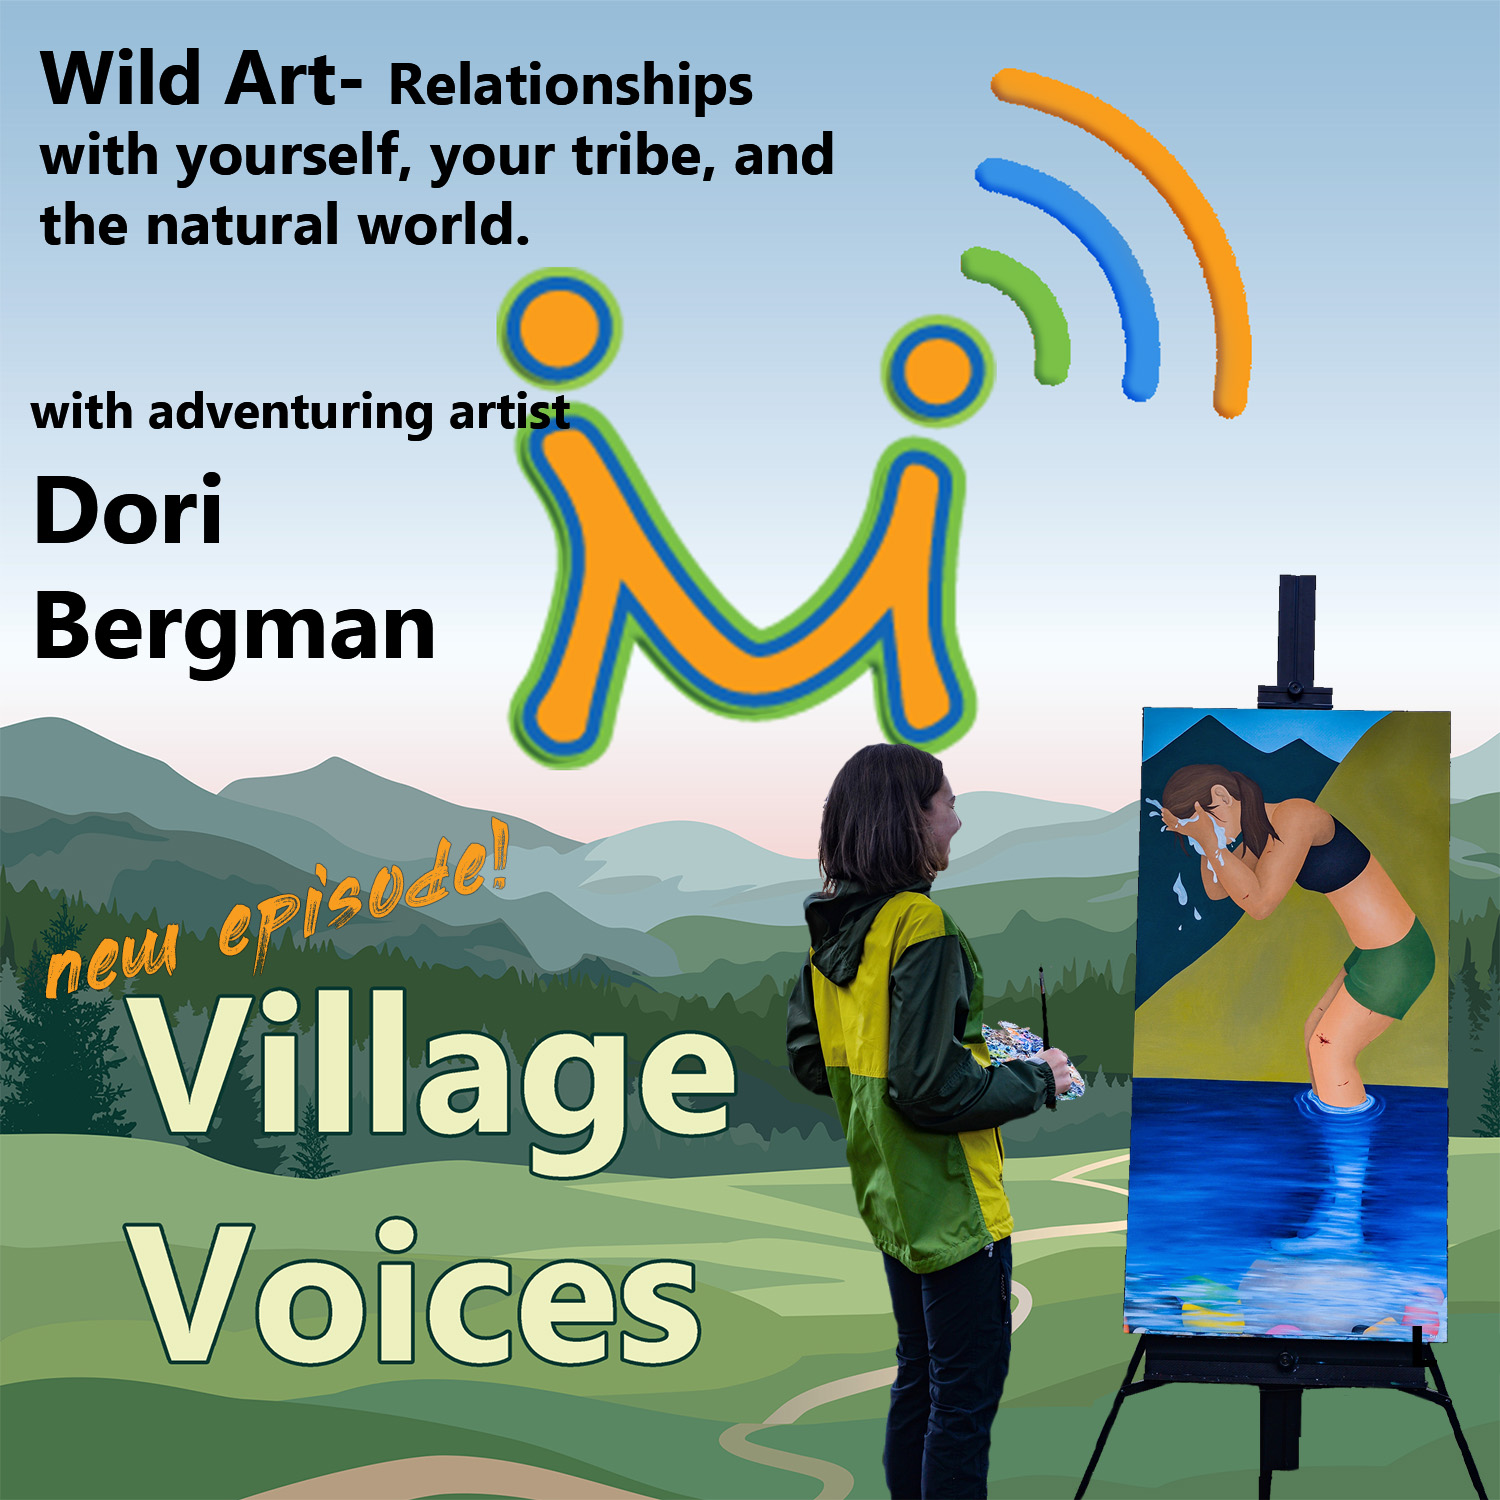 Wild Art- Relationships with yourself, your tribe, and the natural world with artist Dori Bergman